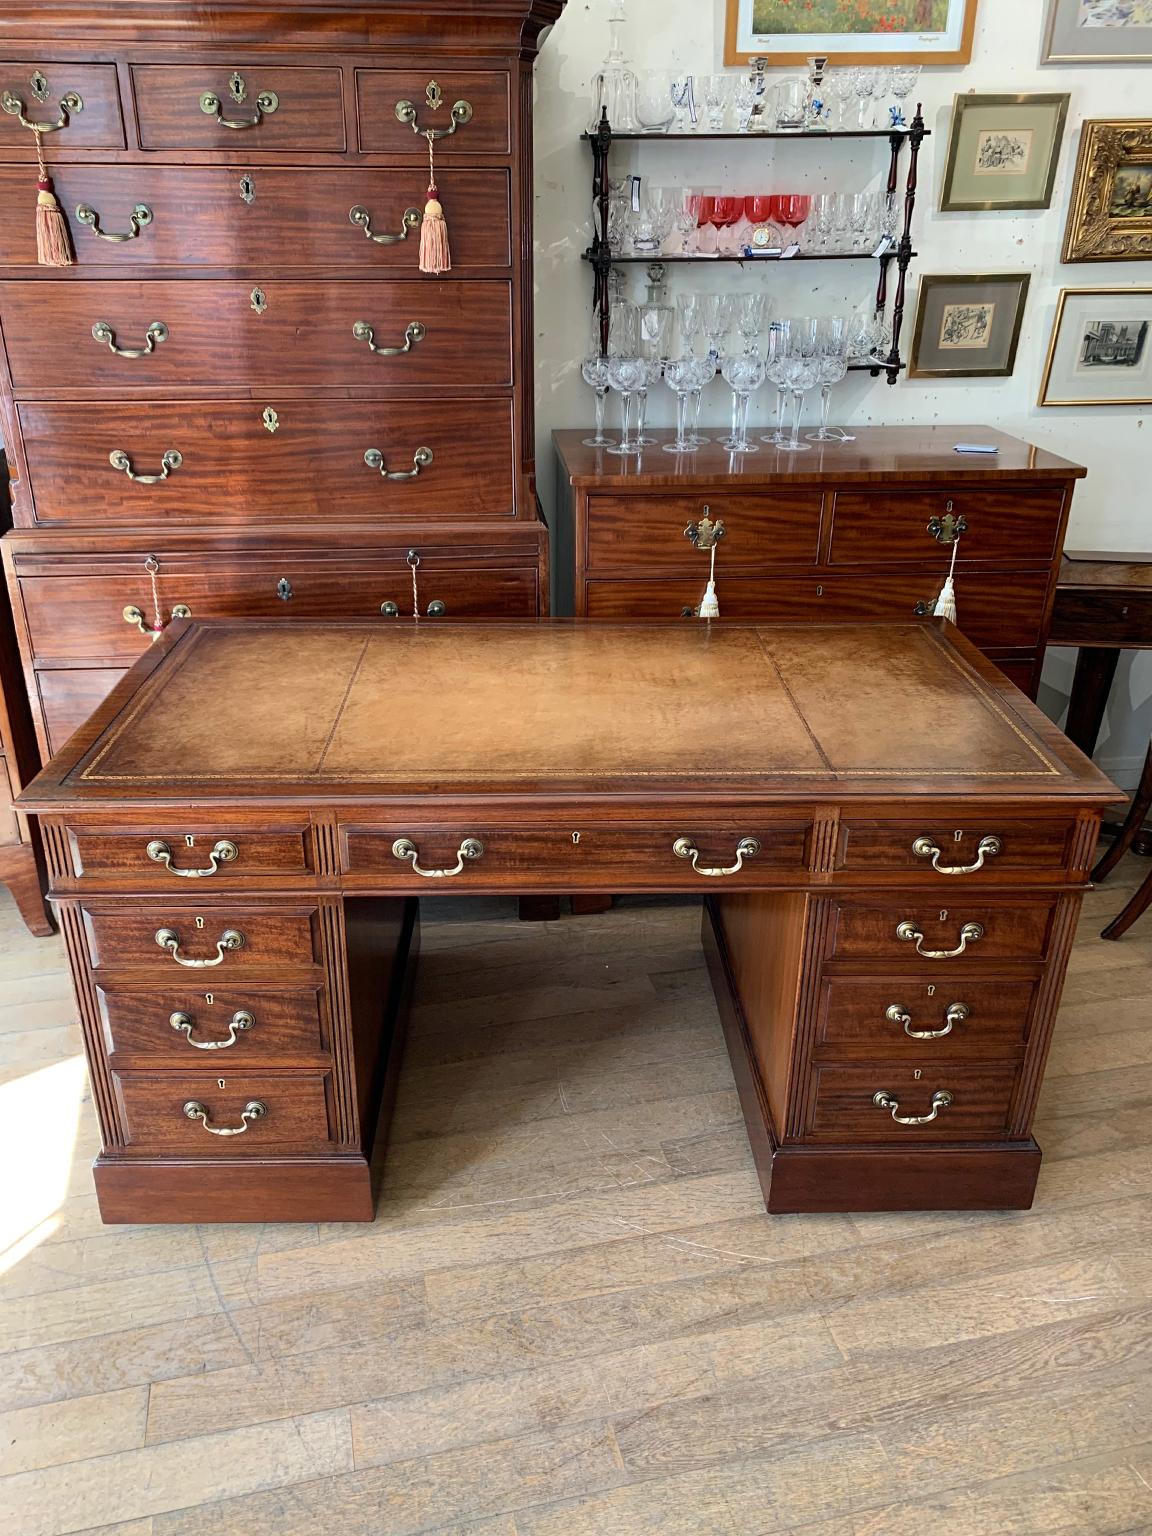 A very high quality 19th century mahogany pedestal desk with tooled leathered writing surface. Nine mahogany lined drawers and original brass swan neck handles on plinth base. Comes apart in three separate sections.

